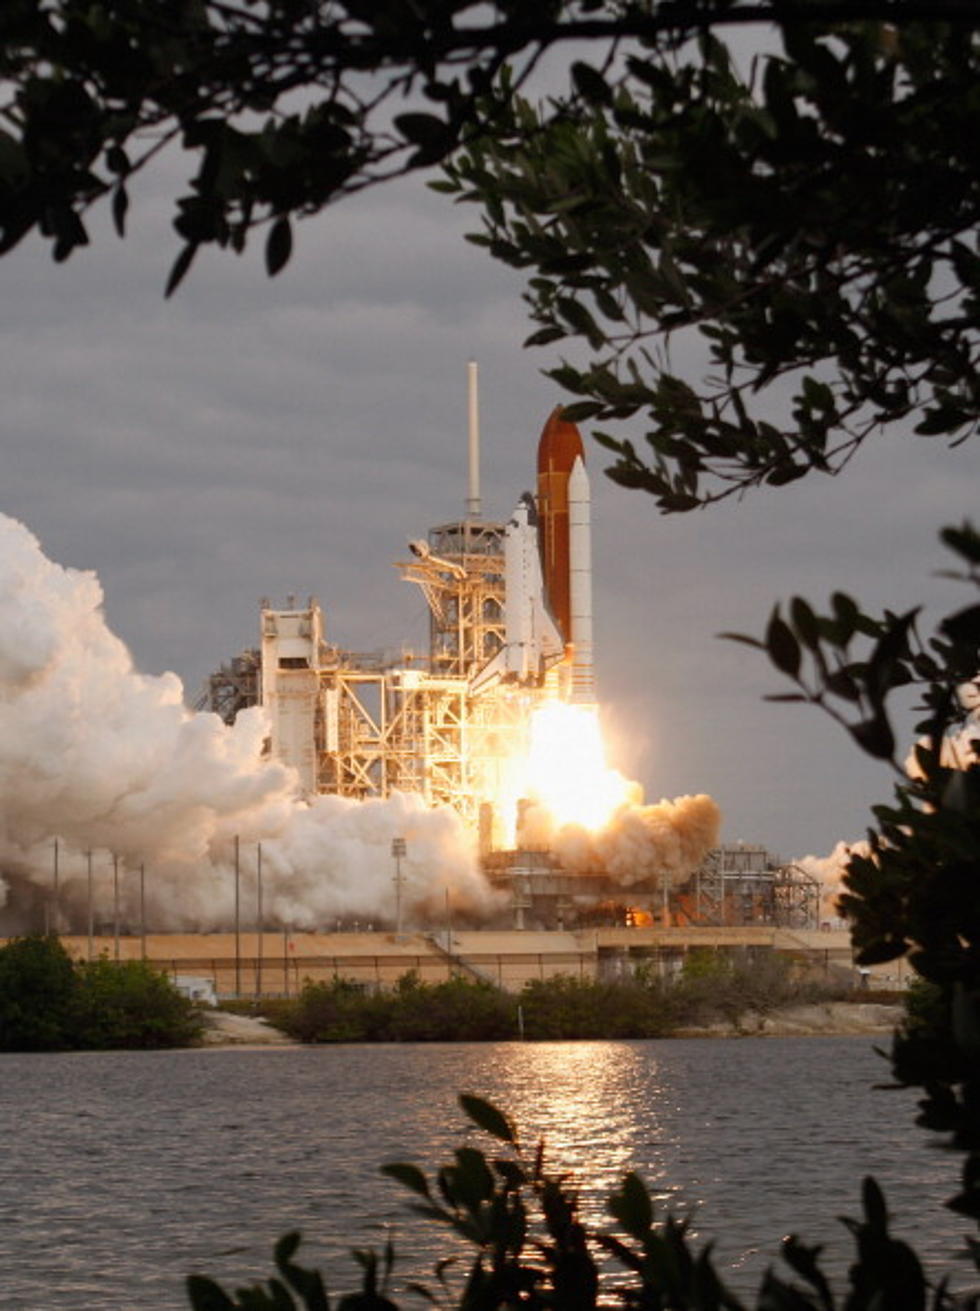 Shuttle Endeavour Lifts Off For The Last Time [VIDEO]